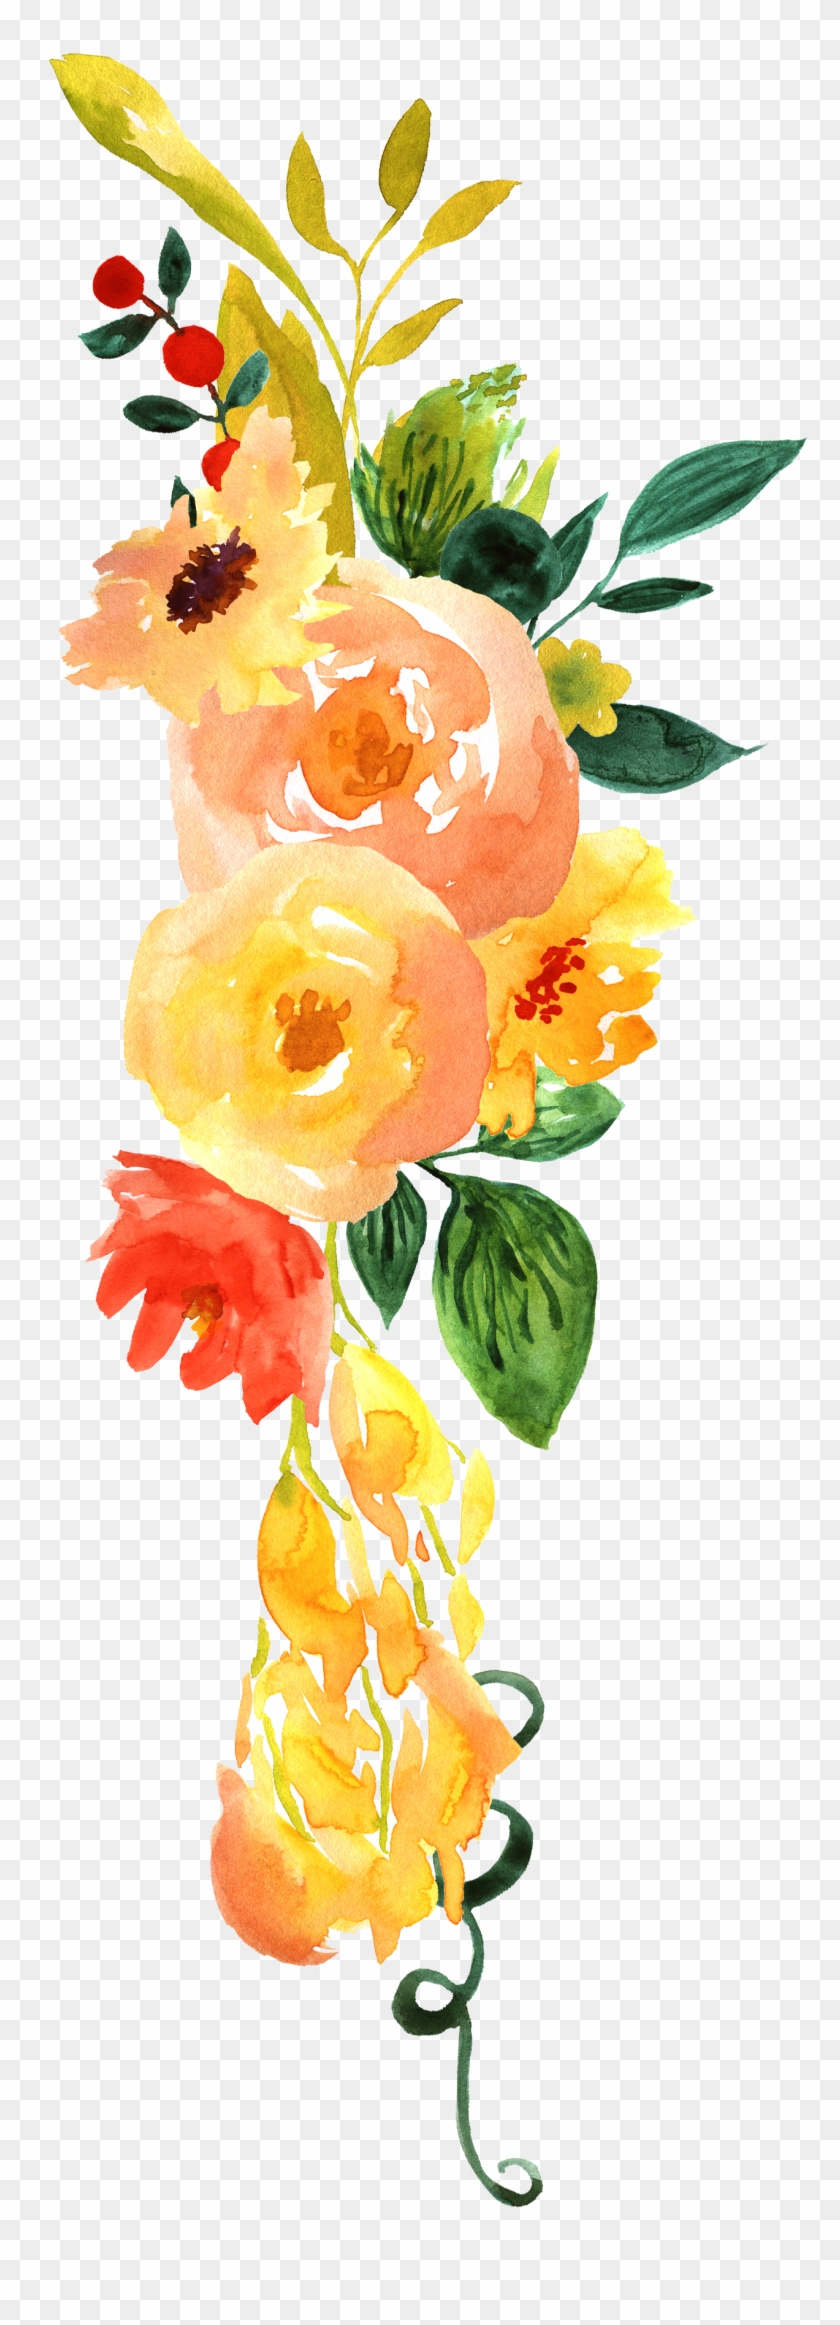 Floral Design Watercolor Painting Flower - Watercolor Painting #1225853